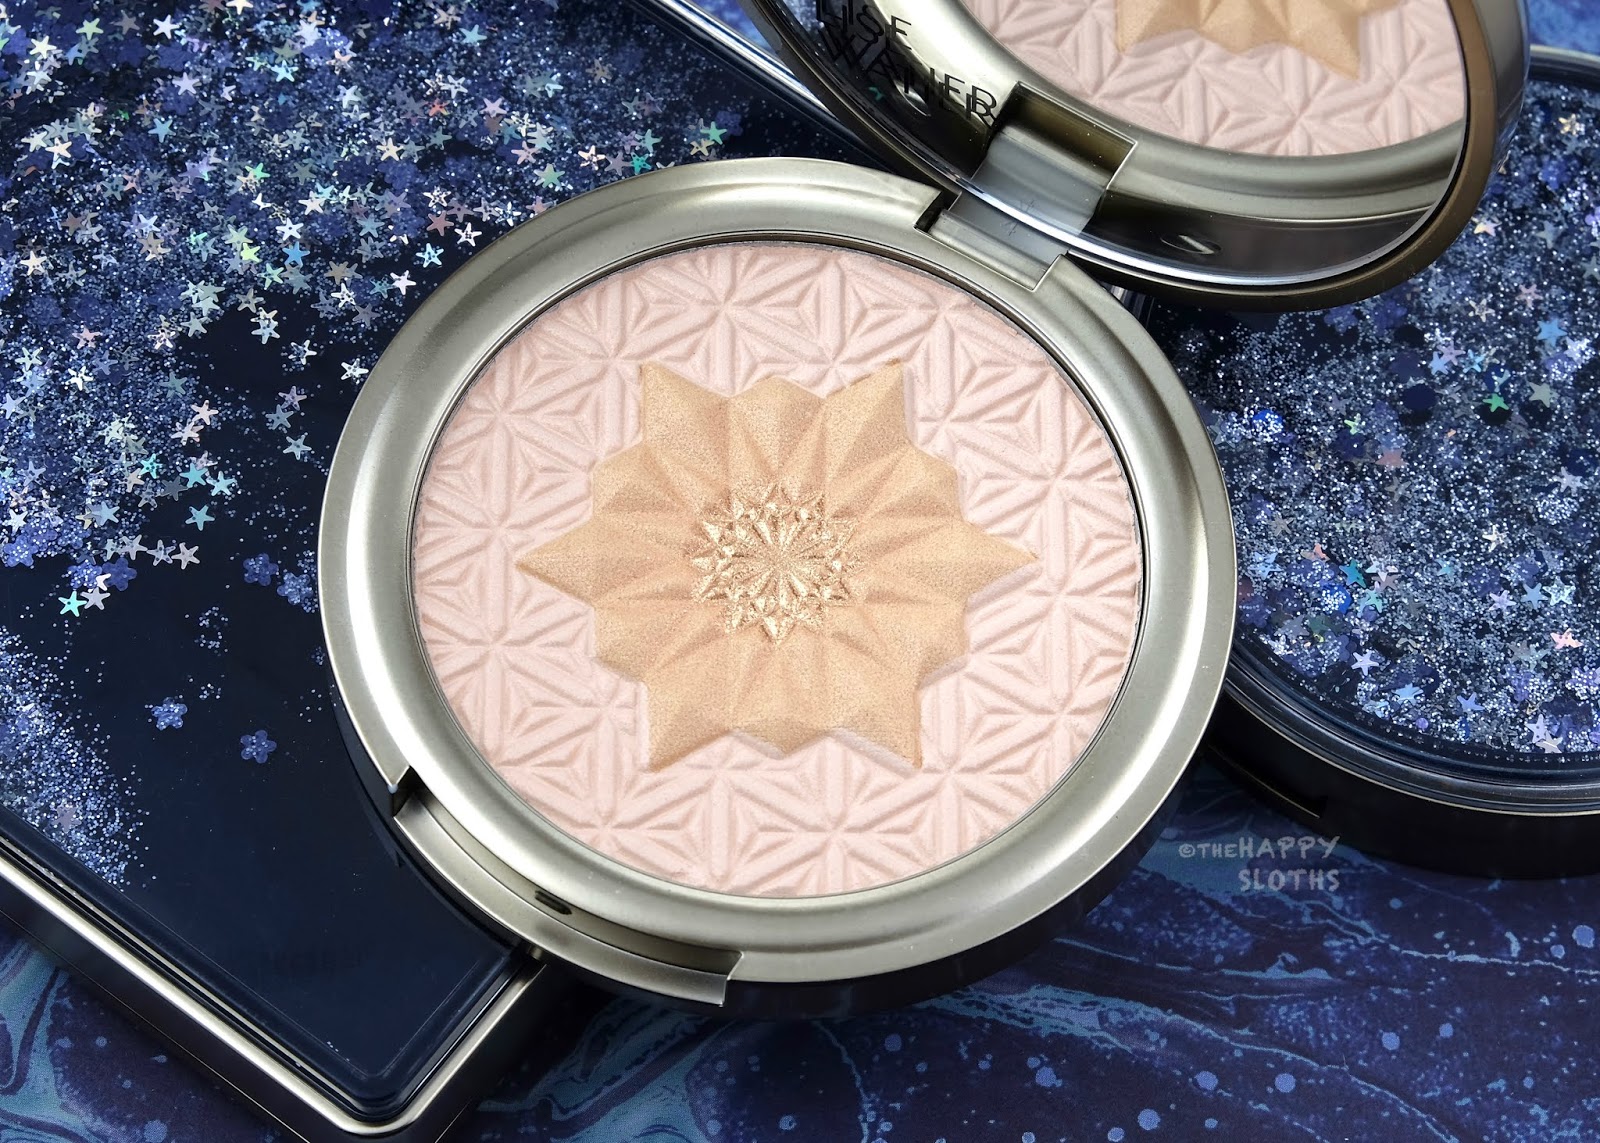 Lise Watier Holiday 2019 Stardust Collection | Blush Powder Duo & Highlighting Powder Duo (C$38 for 9 g):